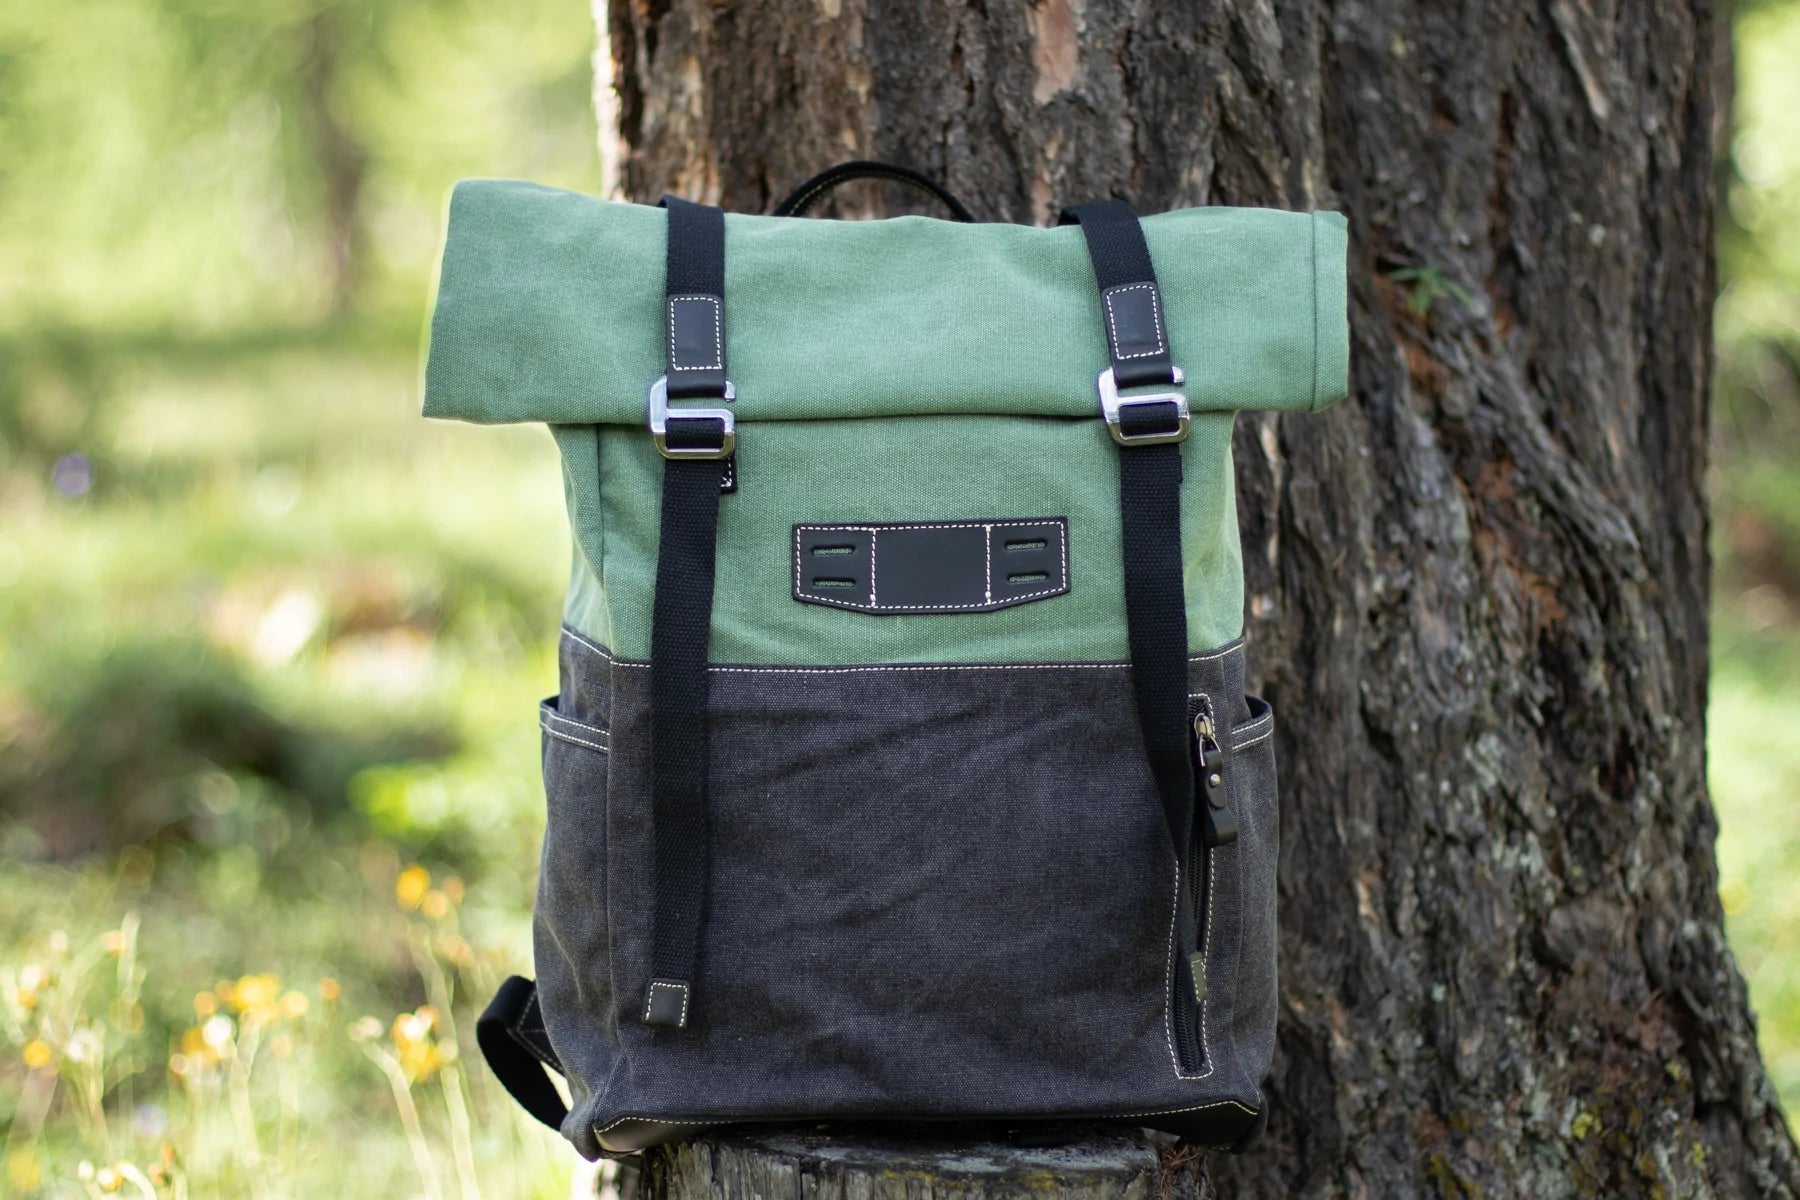 cotton canvas travel pack for mountaineering or camping hiking